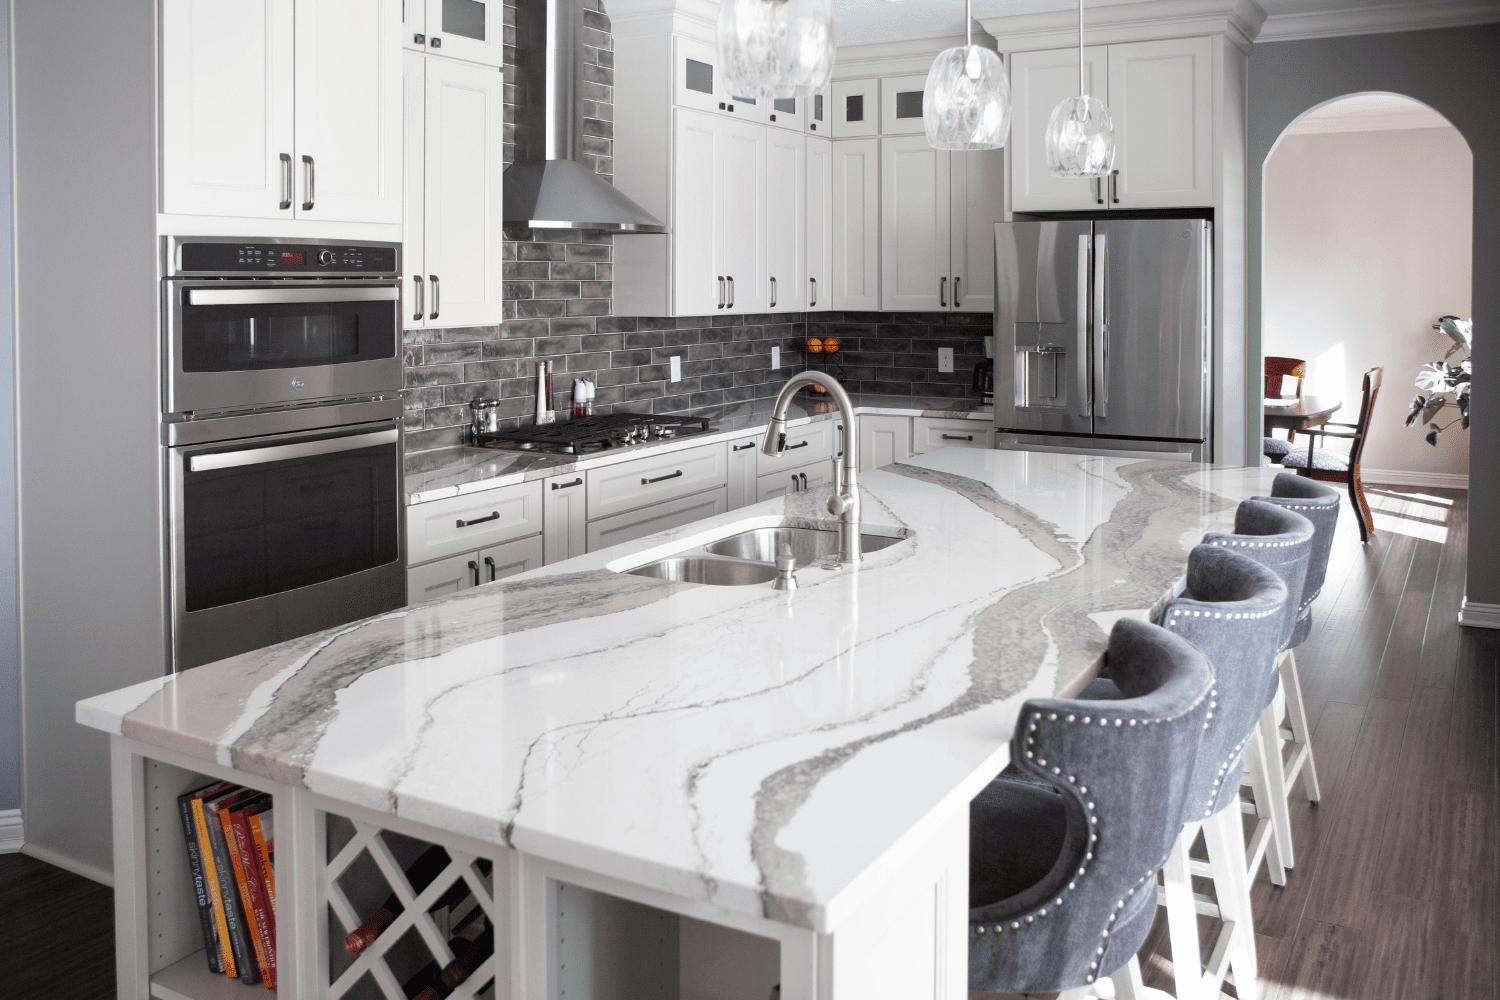 Nicholas Design Build | A kitchen with white cabinets and marble counter tops.